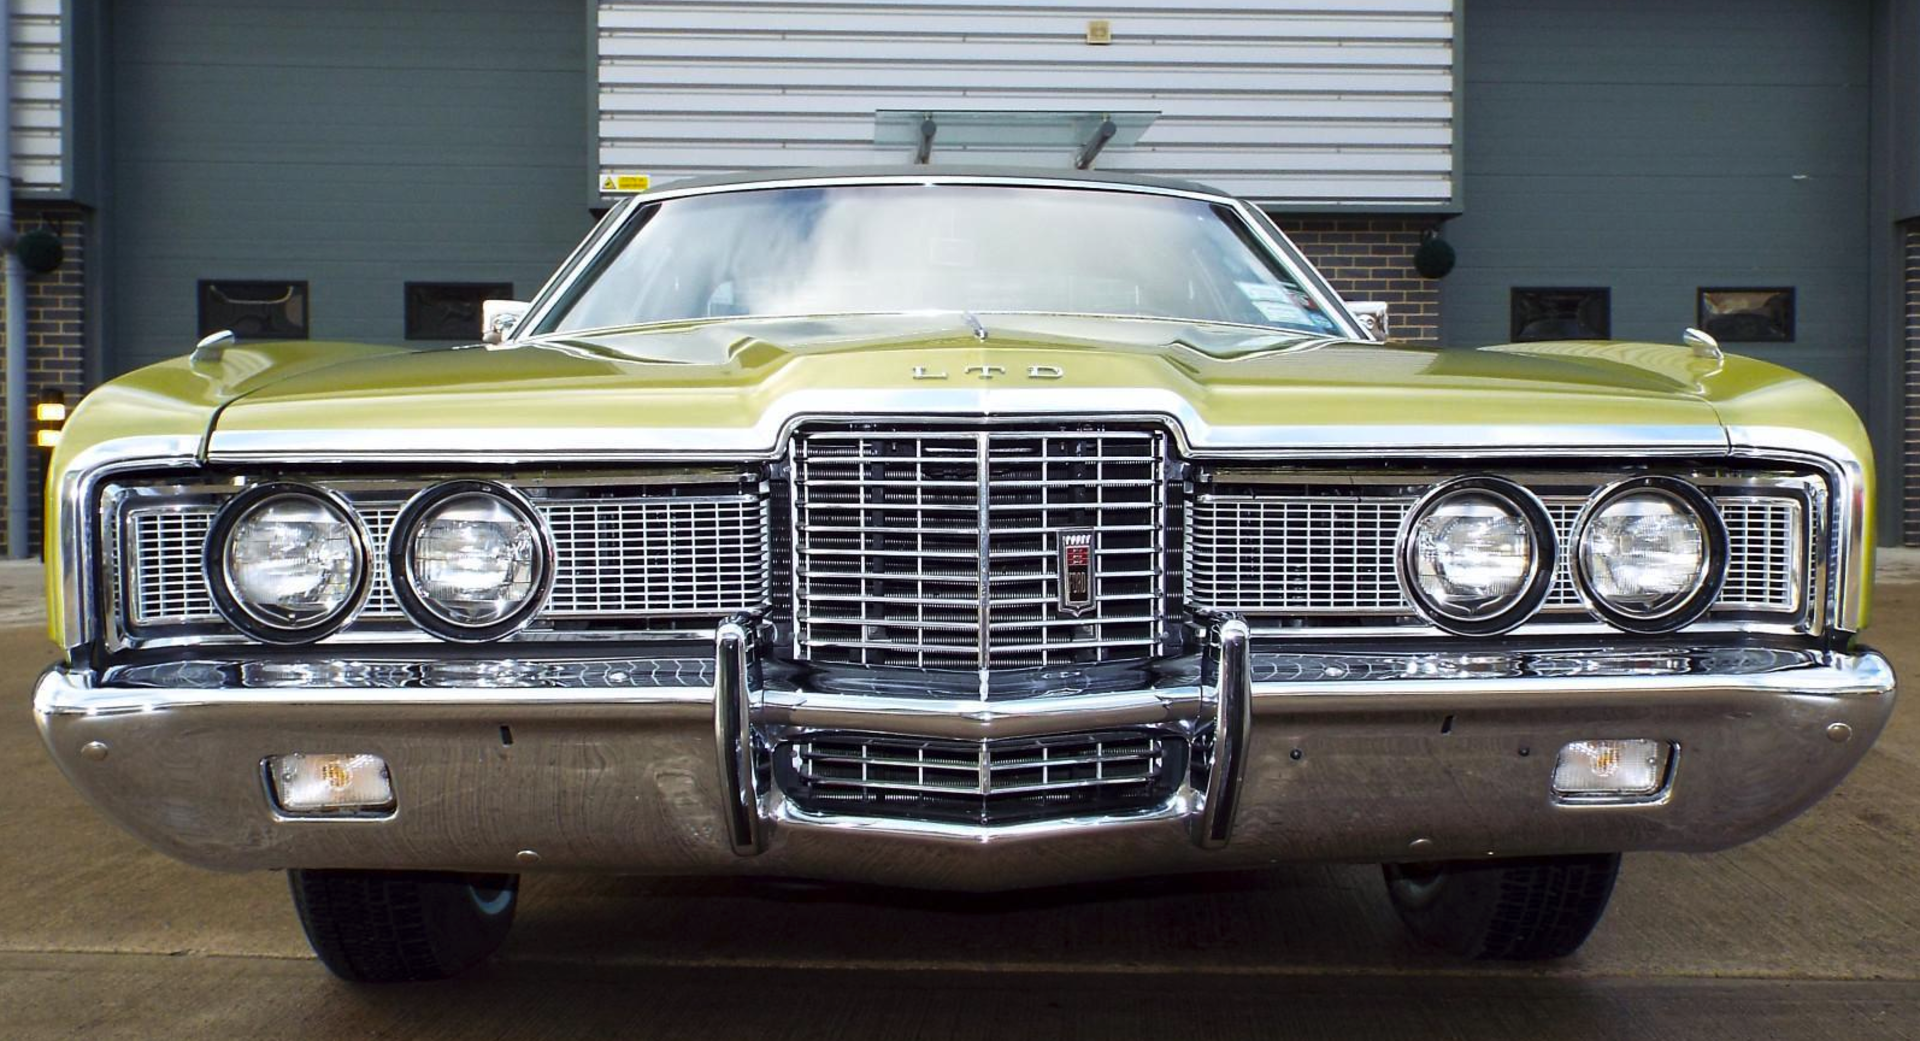 1972 Ford Galaxie 5.8 V8 Ltd Pure Original Example - Image 3 of 13